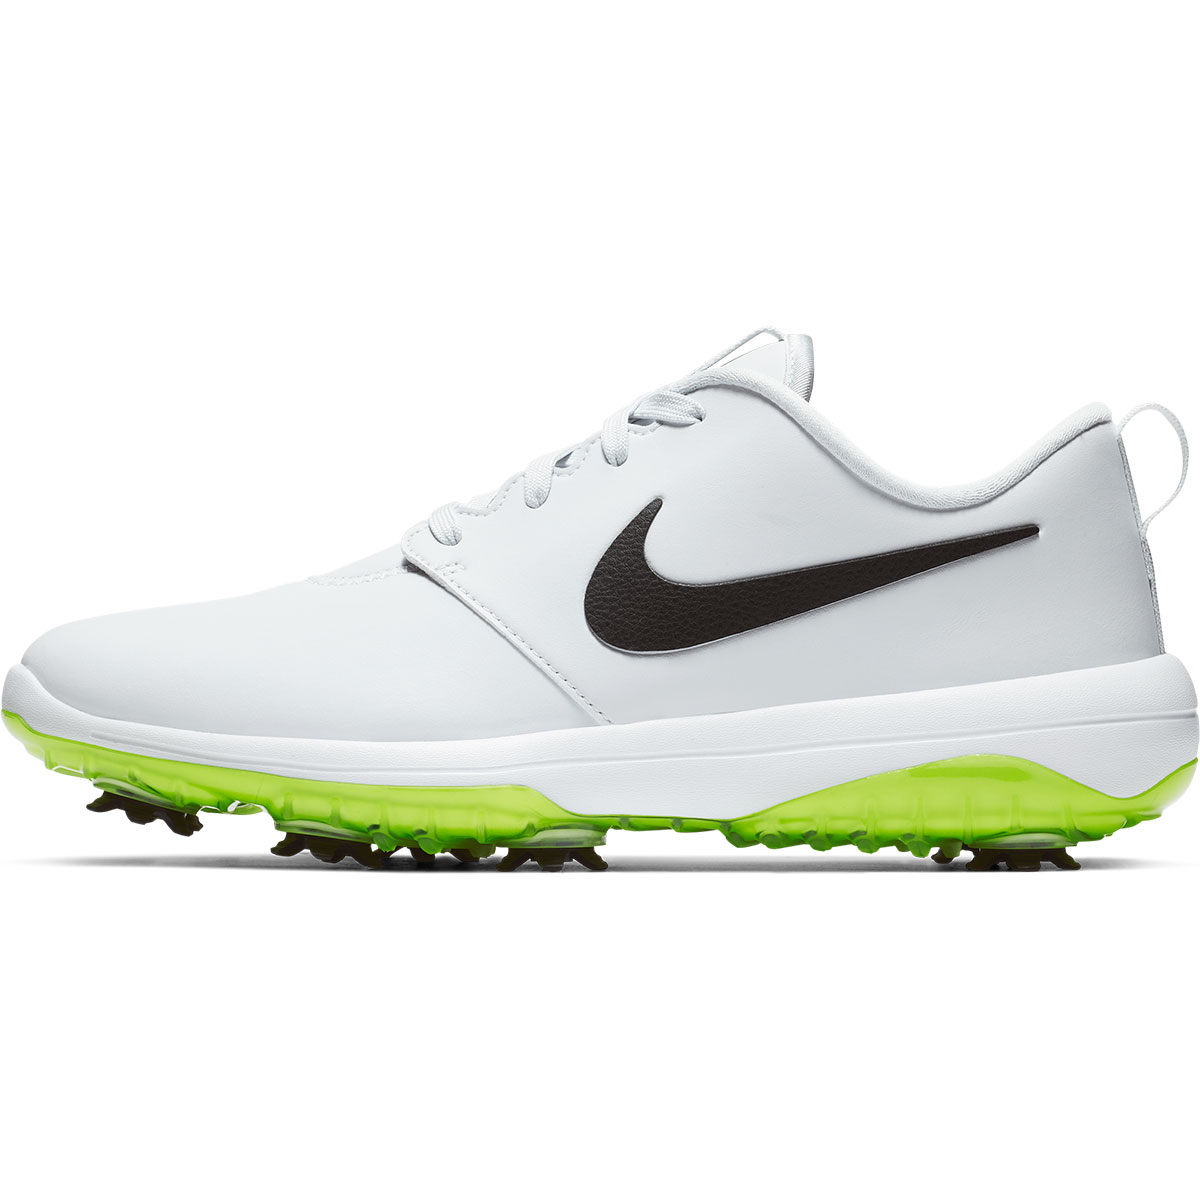 Nike Golf Roshe G Tour Shoes from american golf